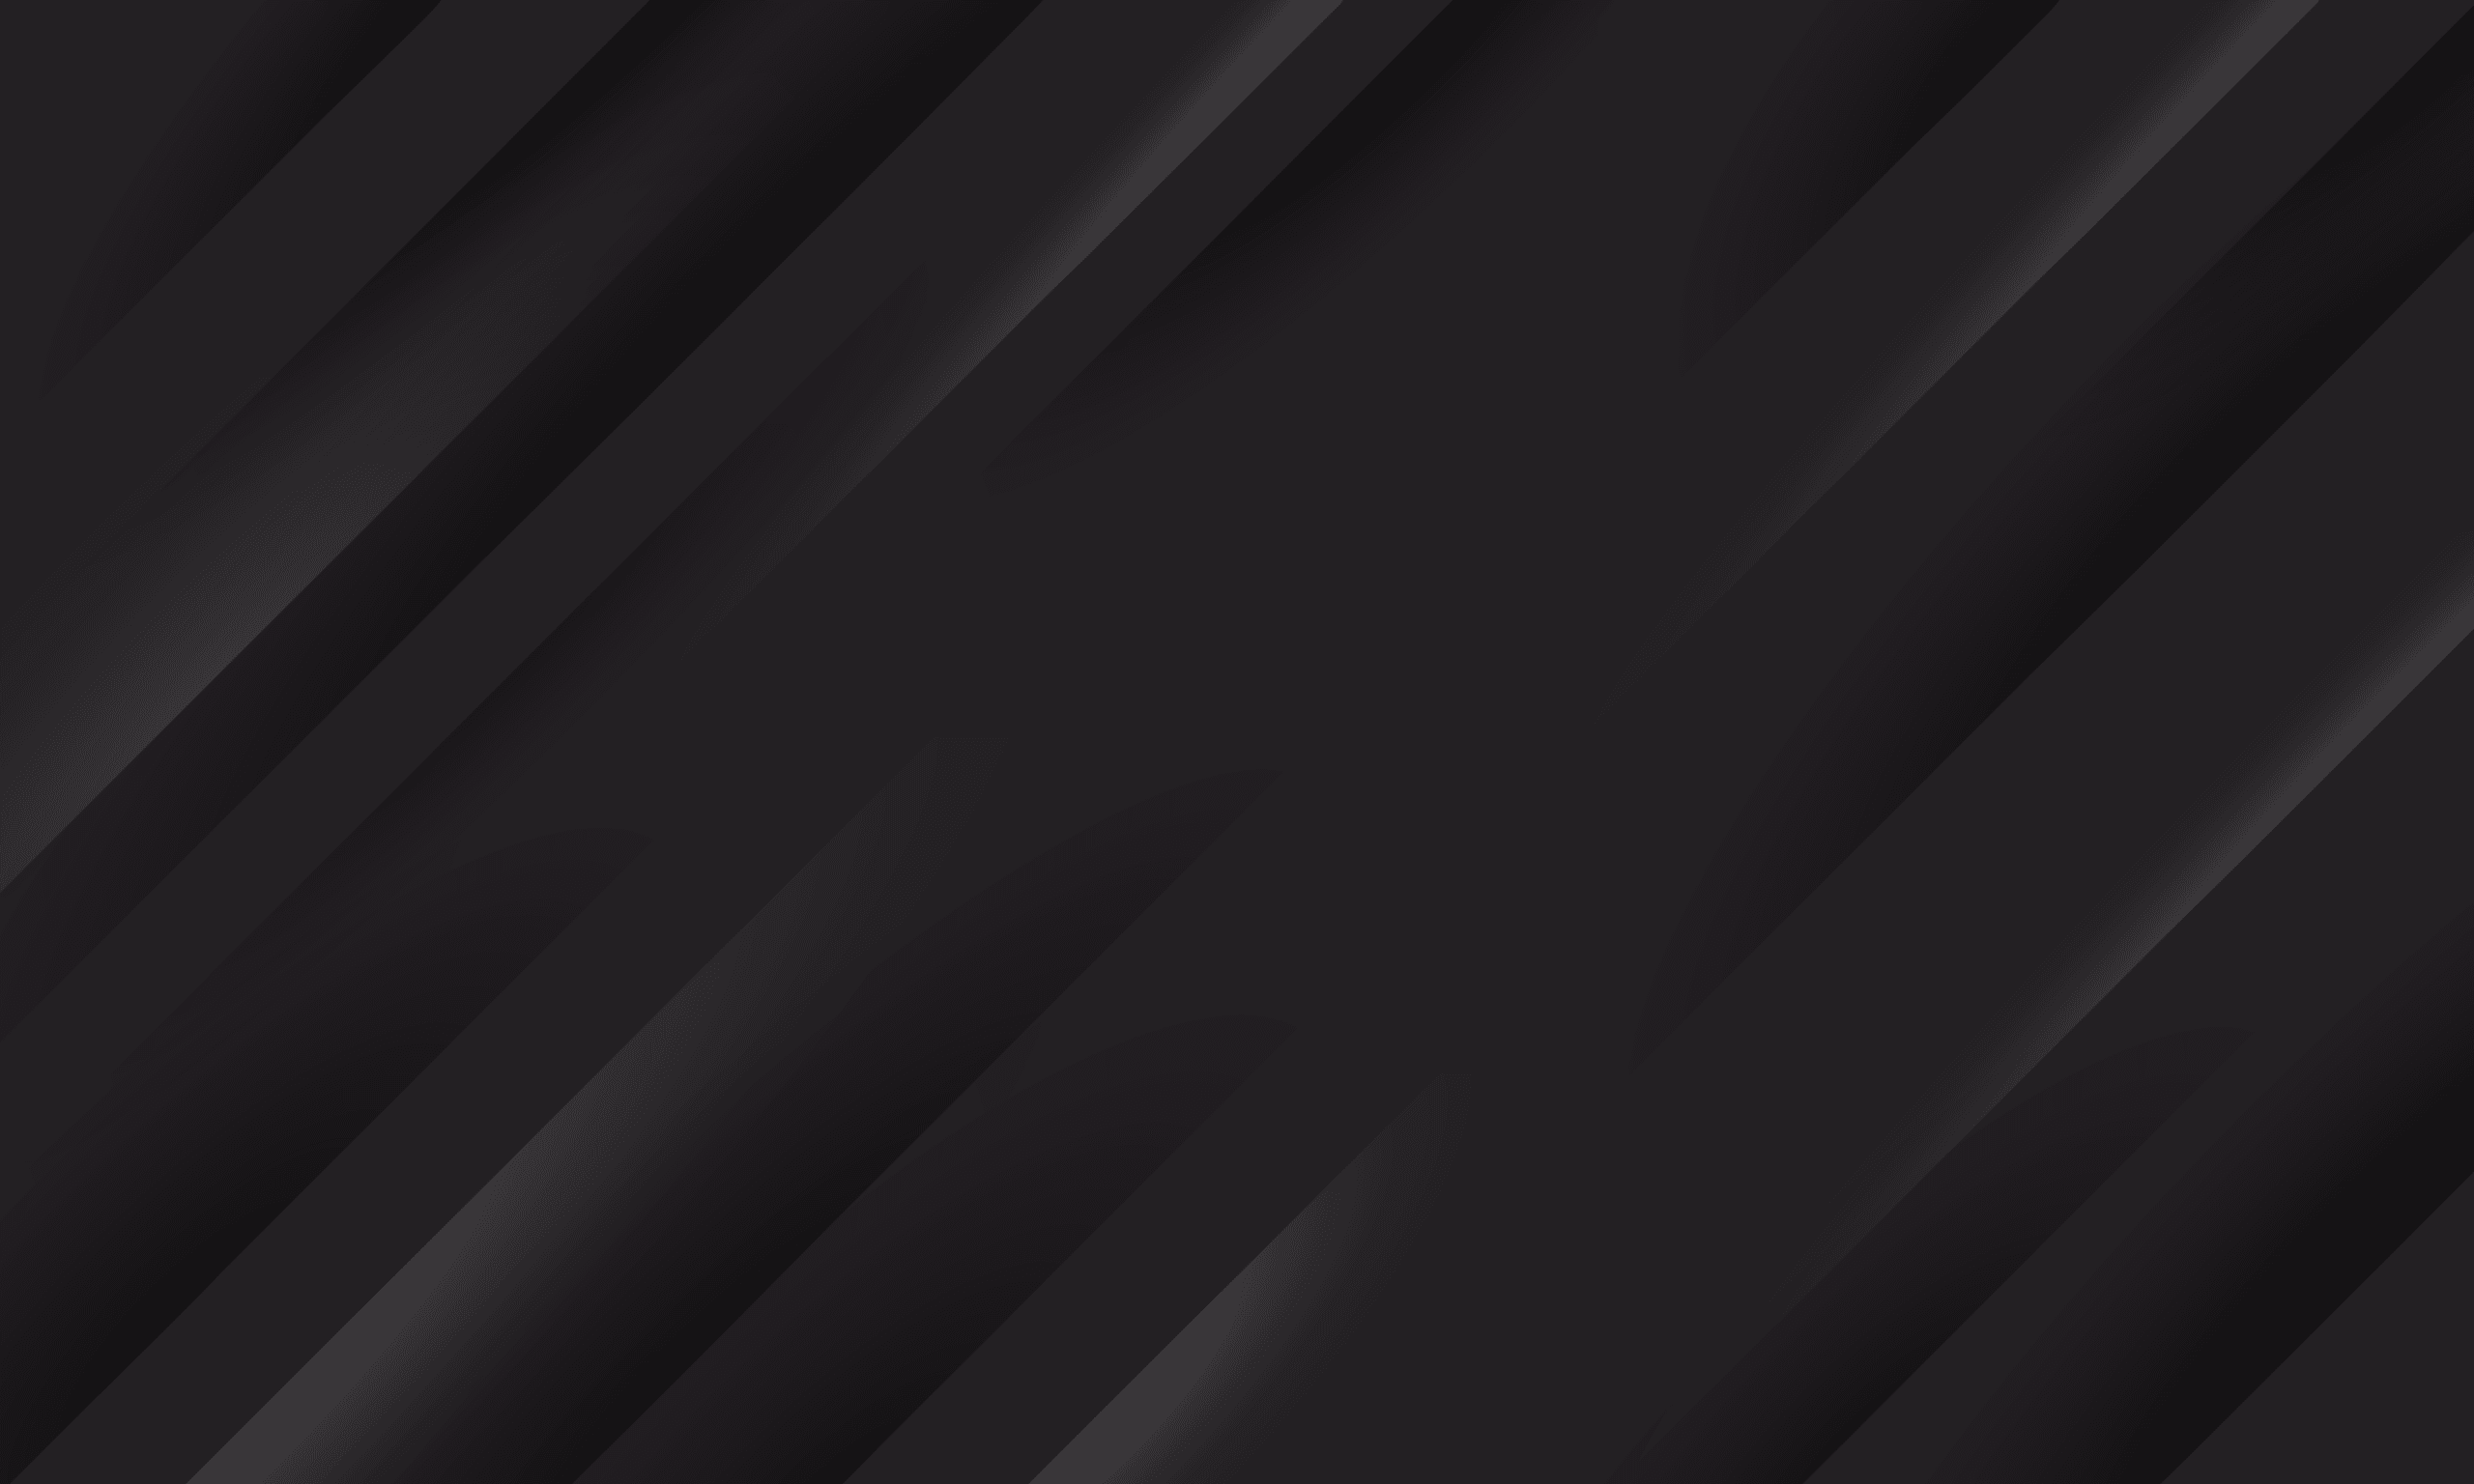 Monochrome image of diagonal stripes with a gradient effect from dark to less dark, showcasing the essence of Xterra.